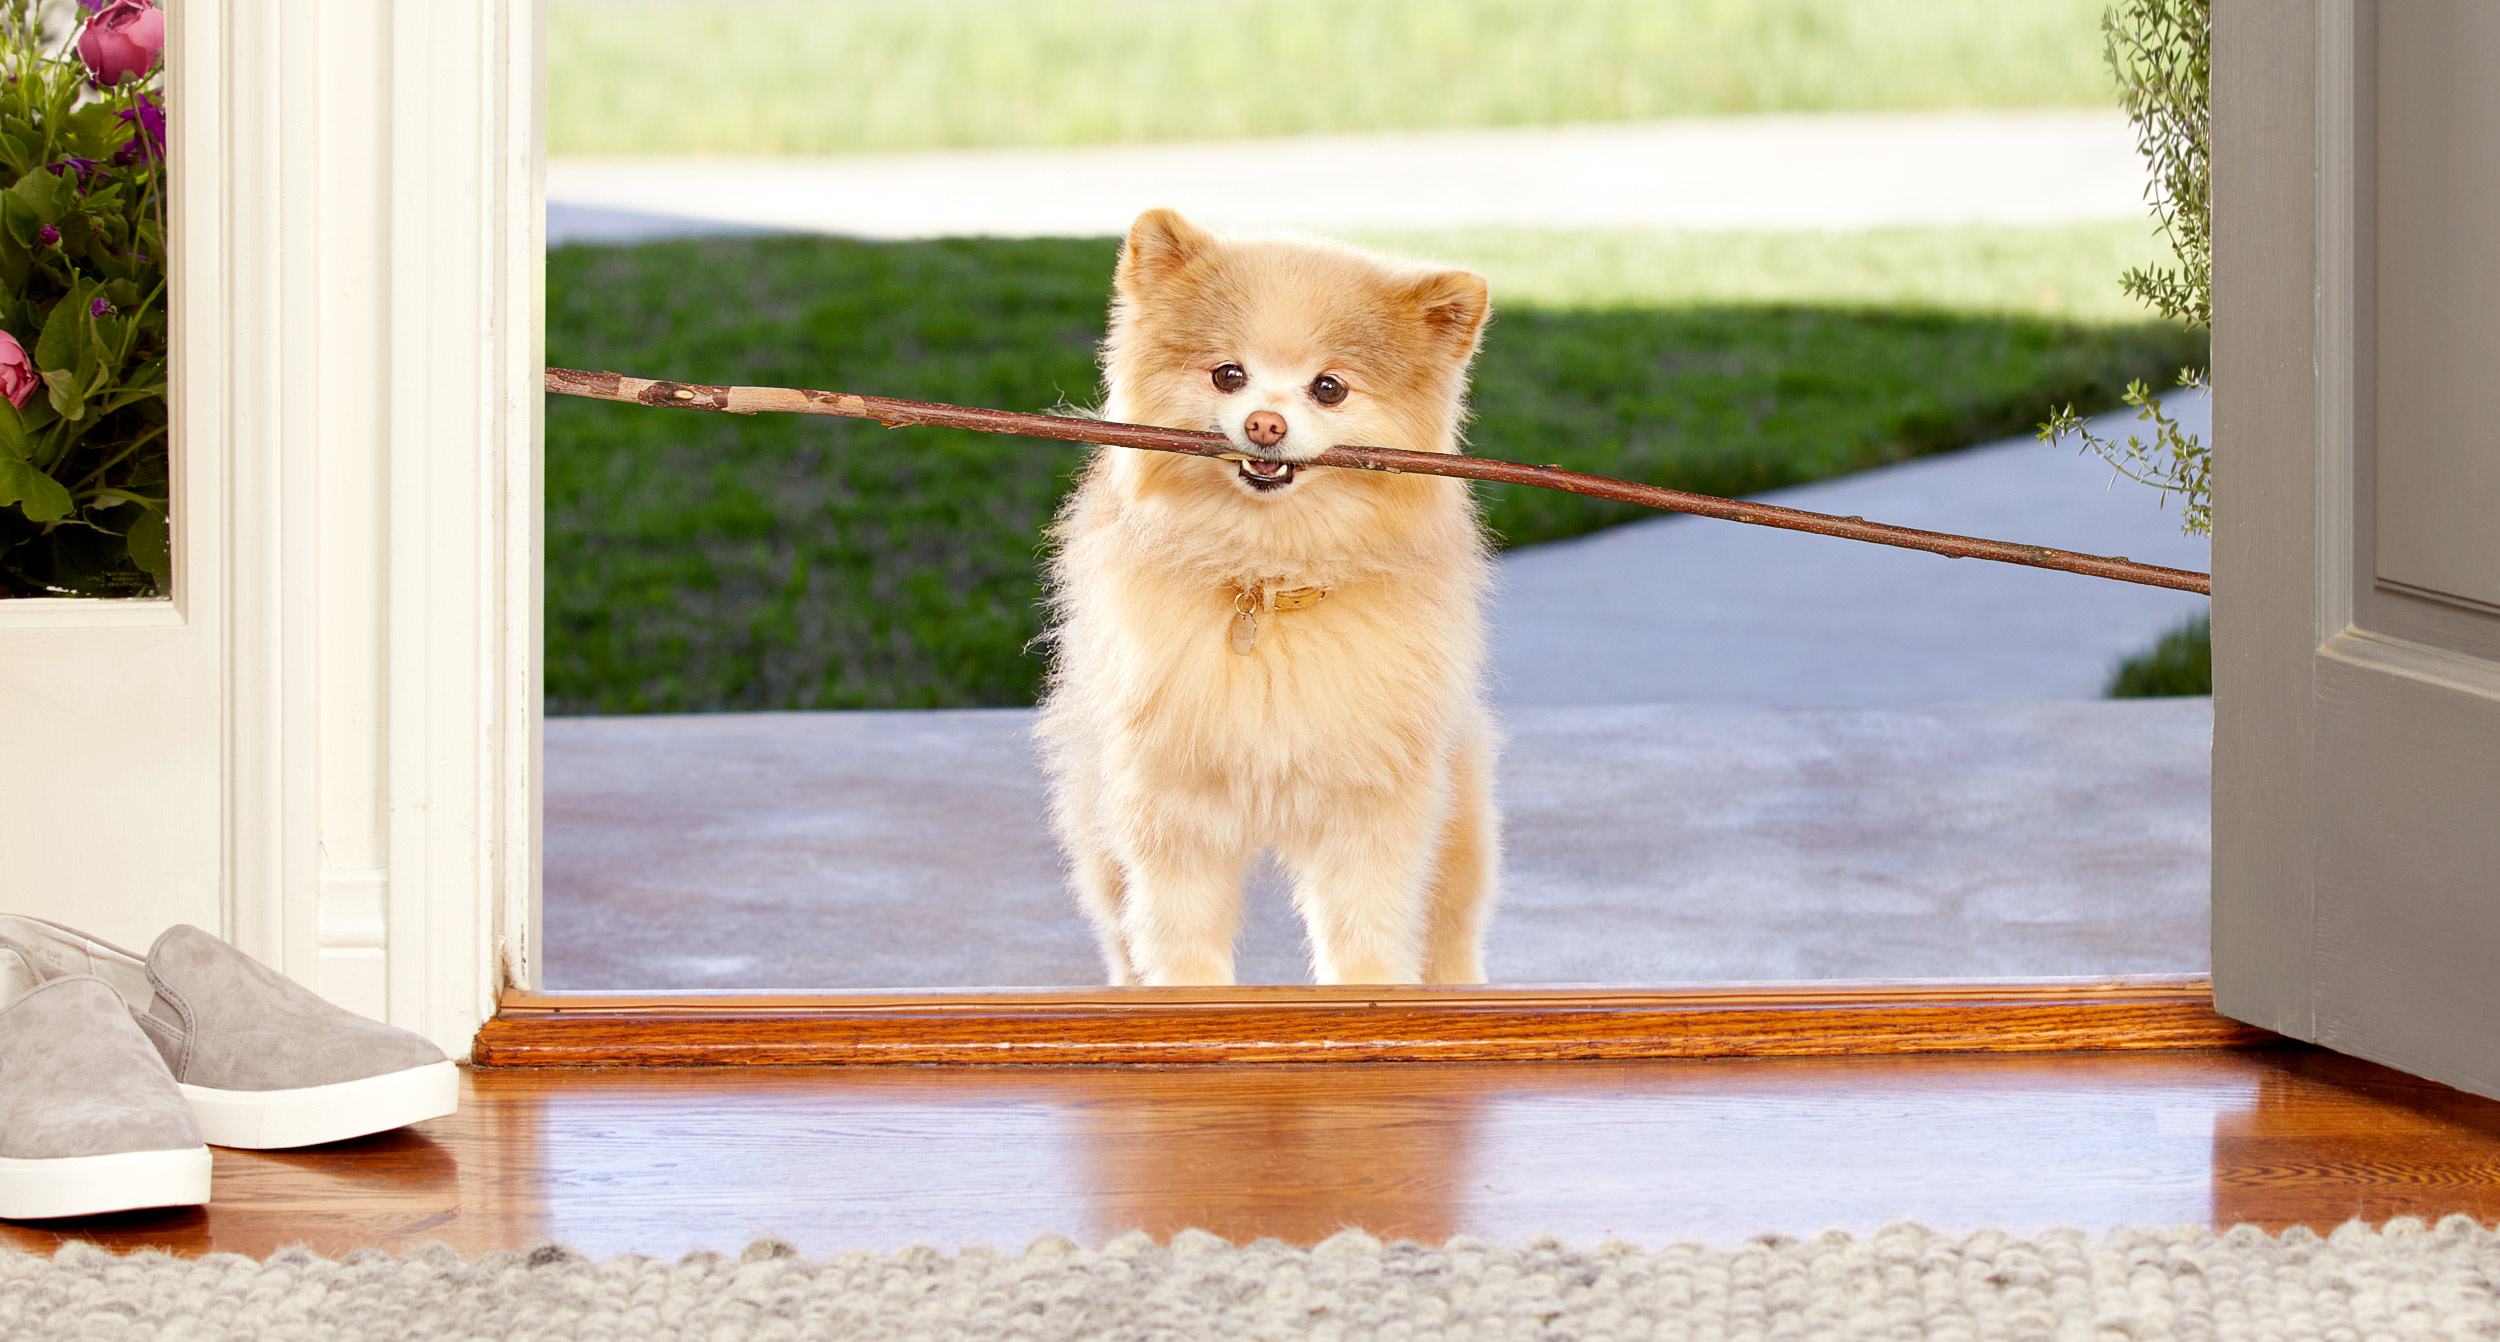 Pomeranian in doorway holding stick in mouth